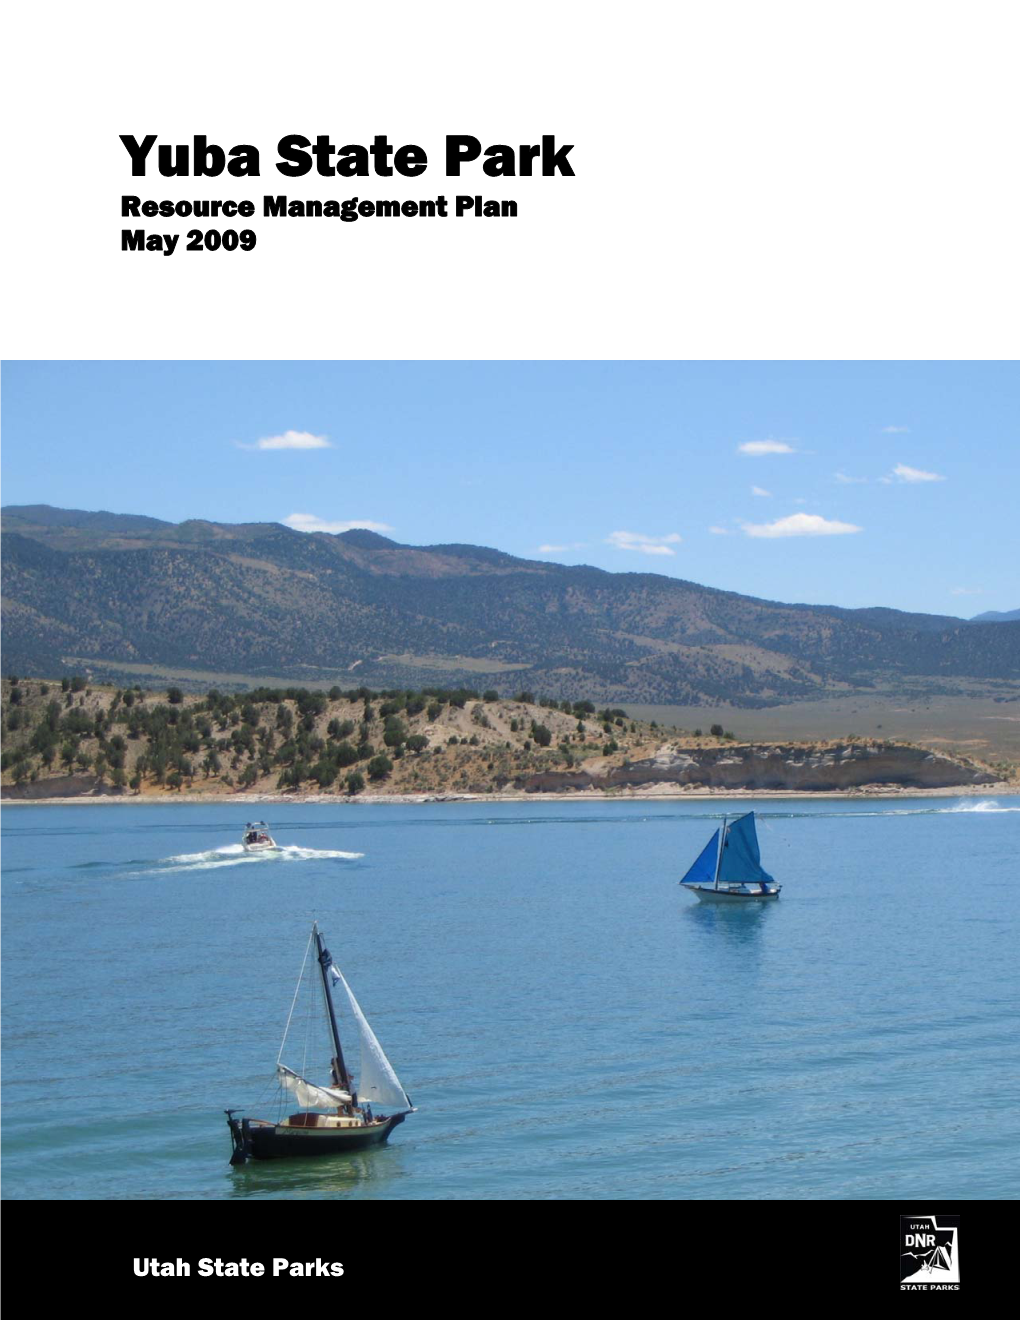 Yuba State Park Resource Management Plan May 2009